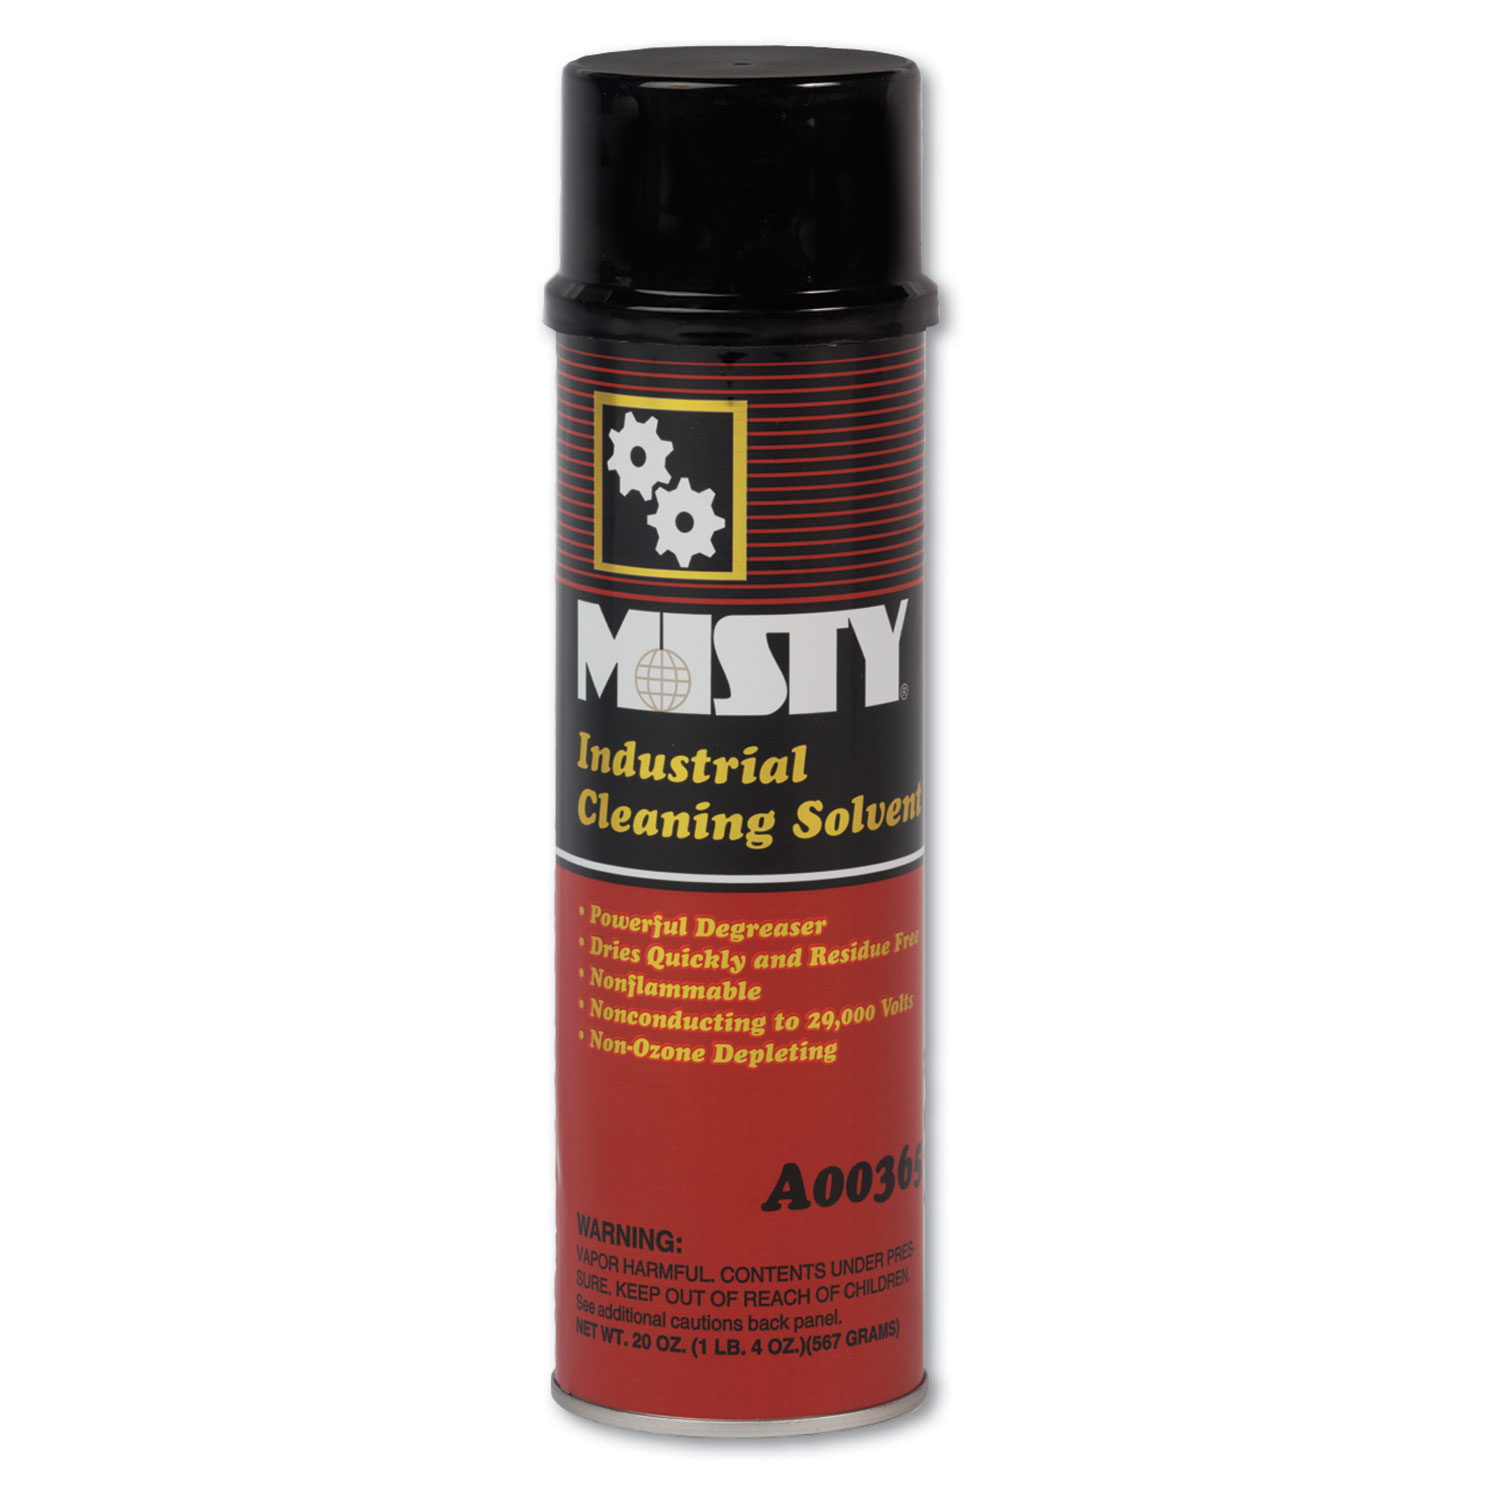  Misty 1002262 ICS Energized Electrical Cleaner, 20 oz Aerosol Can, 12/Carton (AMR1002262) 